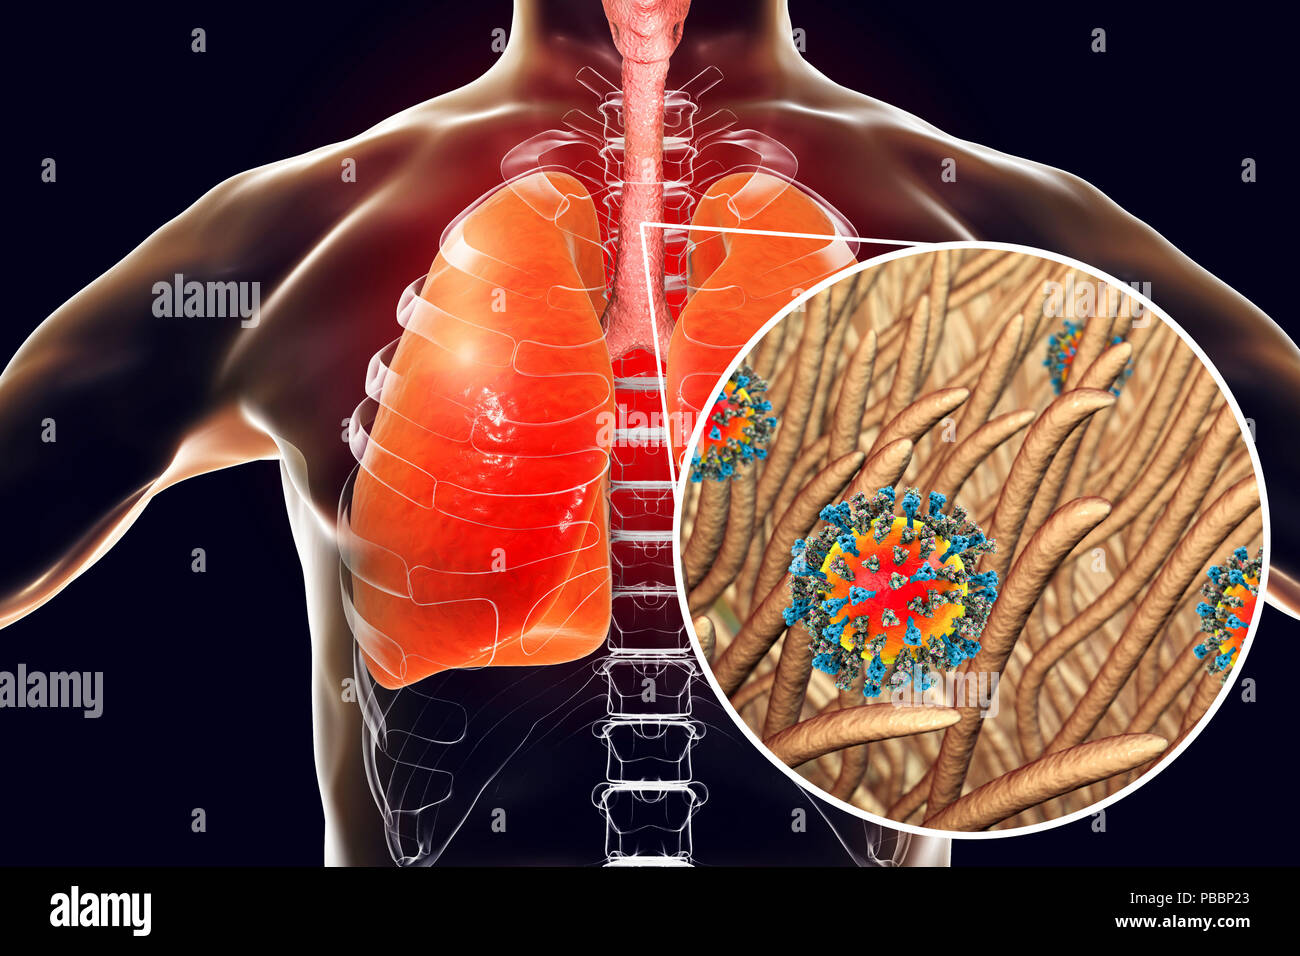 Pneumonia caused by measles viruses, conceptual computer illustration. Measles virus, from the Morbillivirus group of viruses, consists of an RNA (ribonucleic acid) core surrounded by an envelope studded with surface proteins haemagglutinin-neuraminidase and fusion protein, which are used to attach to and penetrate a host cell. Measles is a highly infectious itchy rash with a fever. It mainly affects children, but one attack usually gives life-long immunity. Pneumonia is one of common complications of measles. Stock Photo